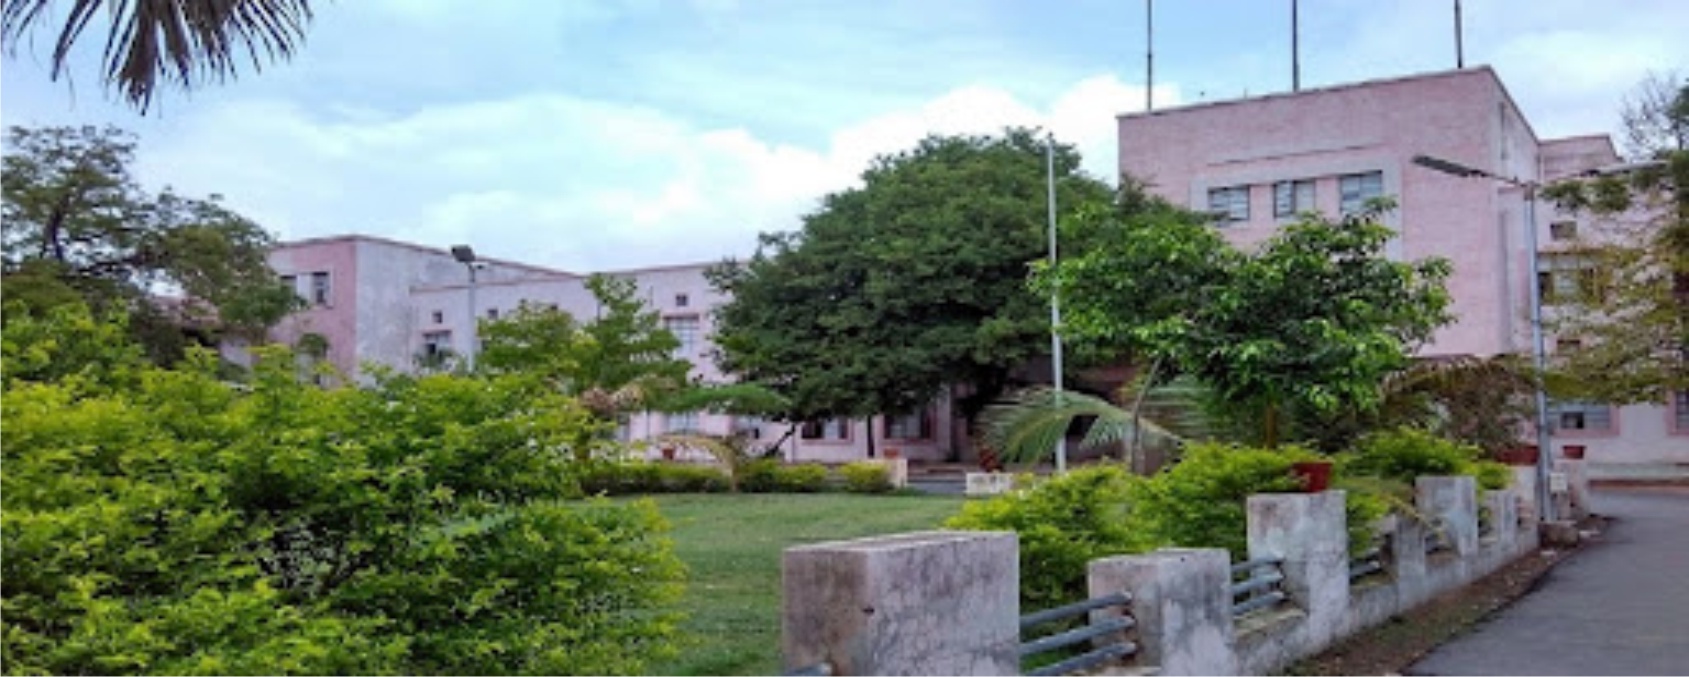 Government Polytechnic College - Ahmedabad